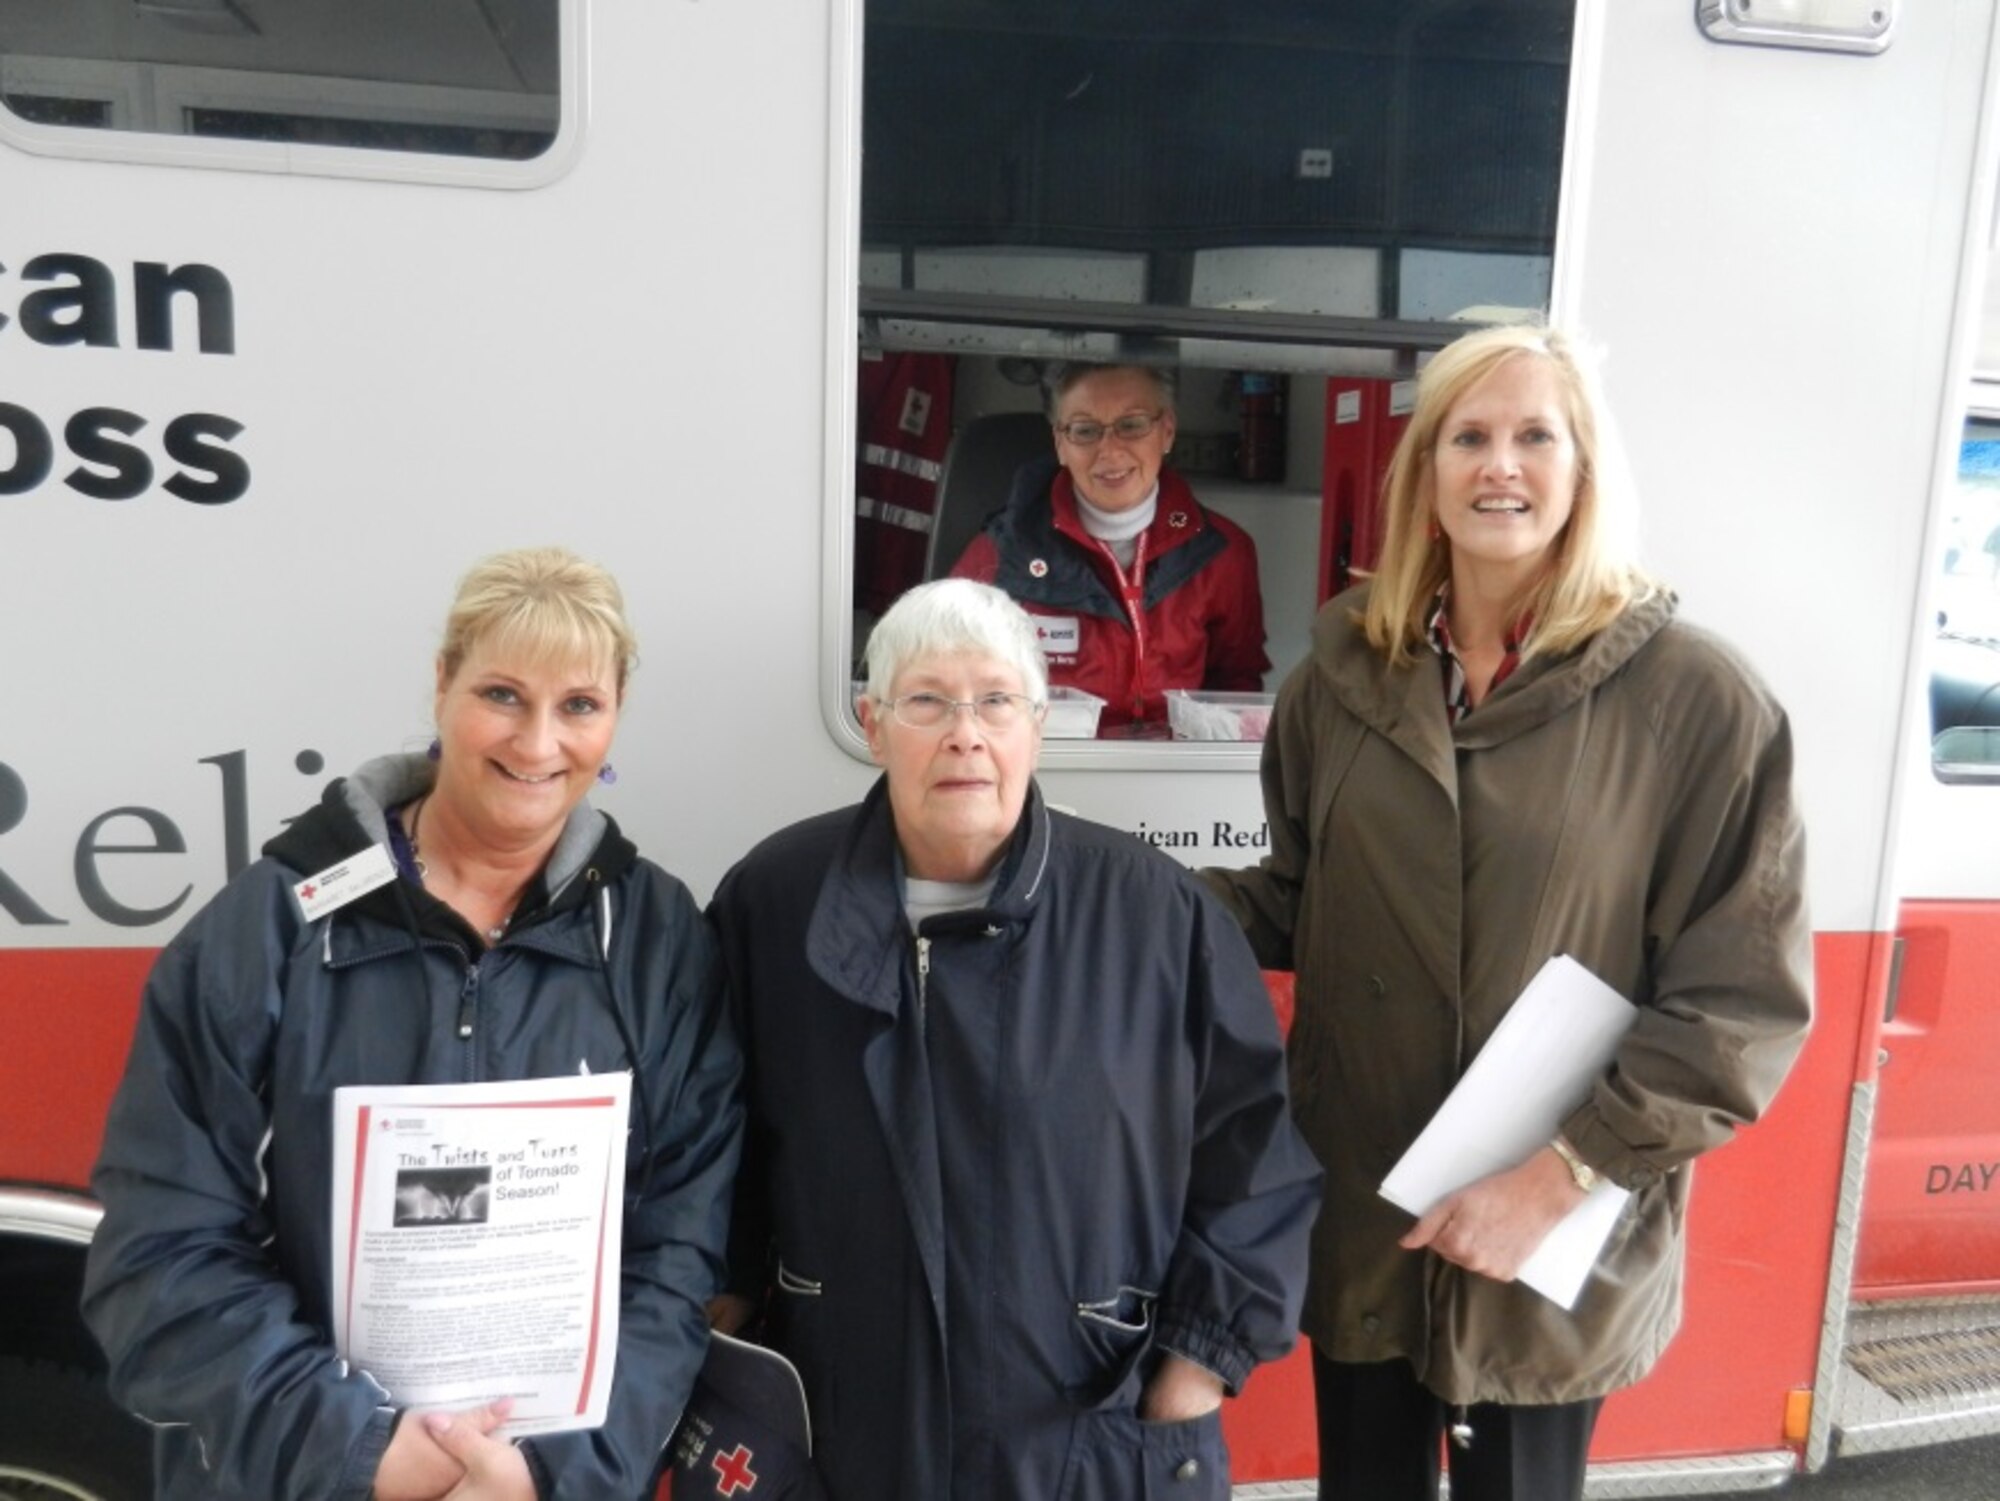 Representatives from the Dayton Chapter of the American Red Cross visited Wright-Patterson Air Force Base on March 26 with an Emergency Response Vehicle. Left to right are Margaret Delorenzo, Loretta Johanson, Carolyn Burns and Laura Seyfang. (Contributed photo)  
